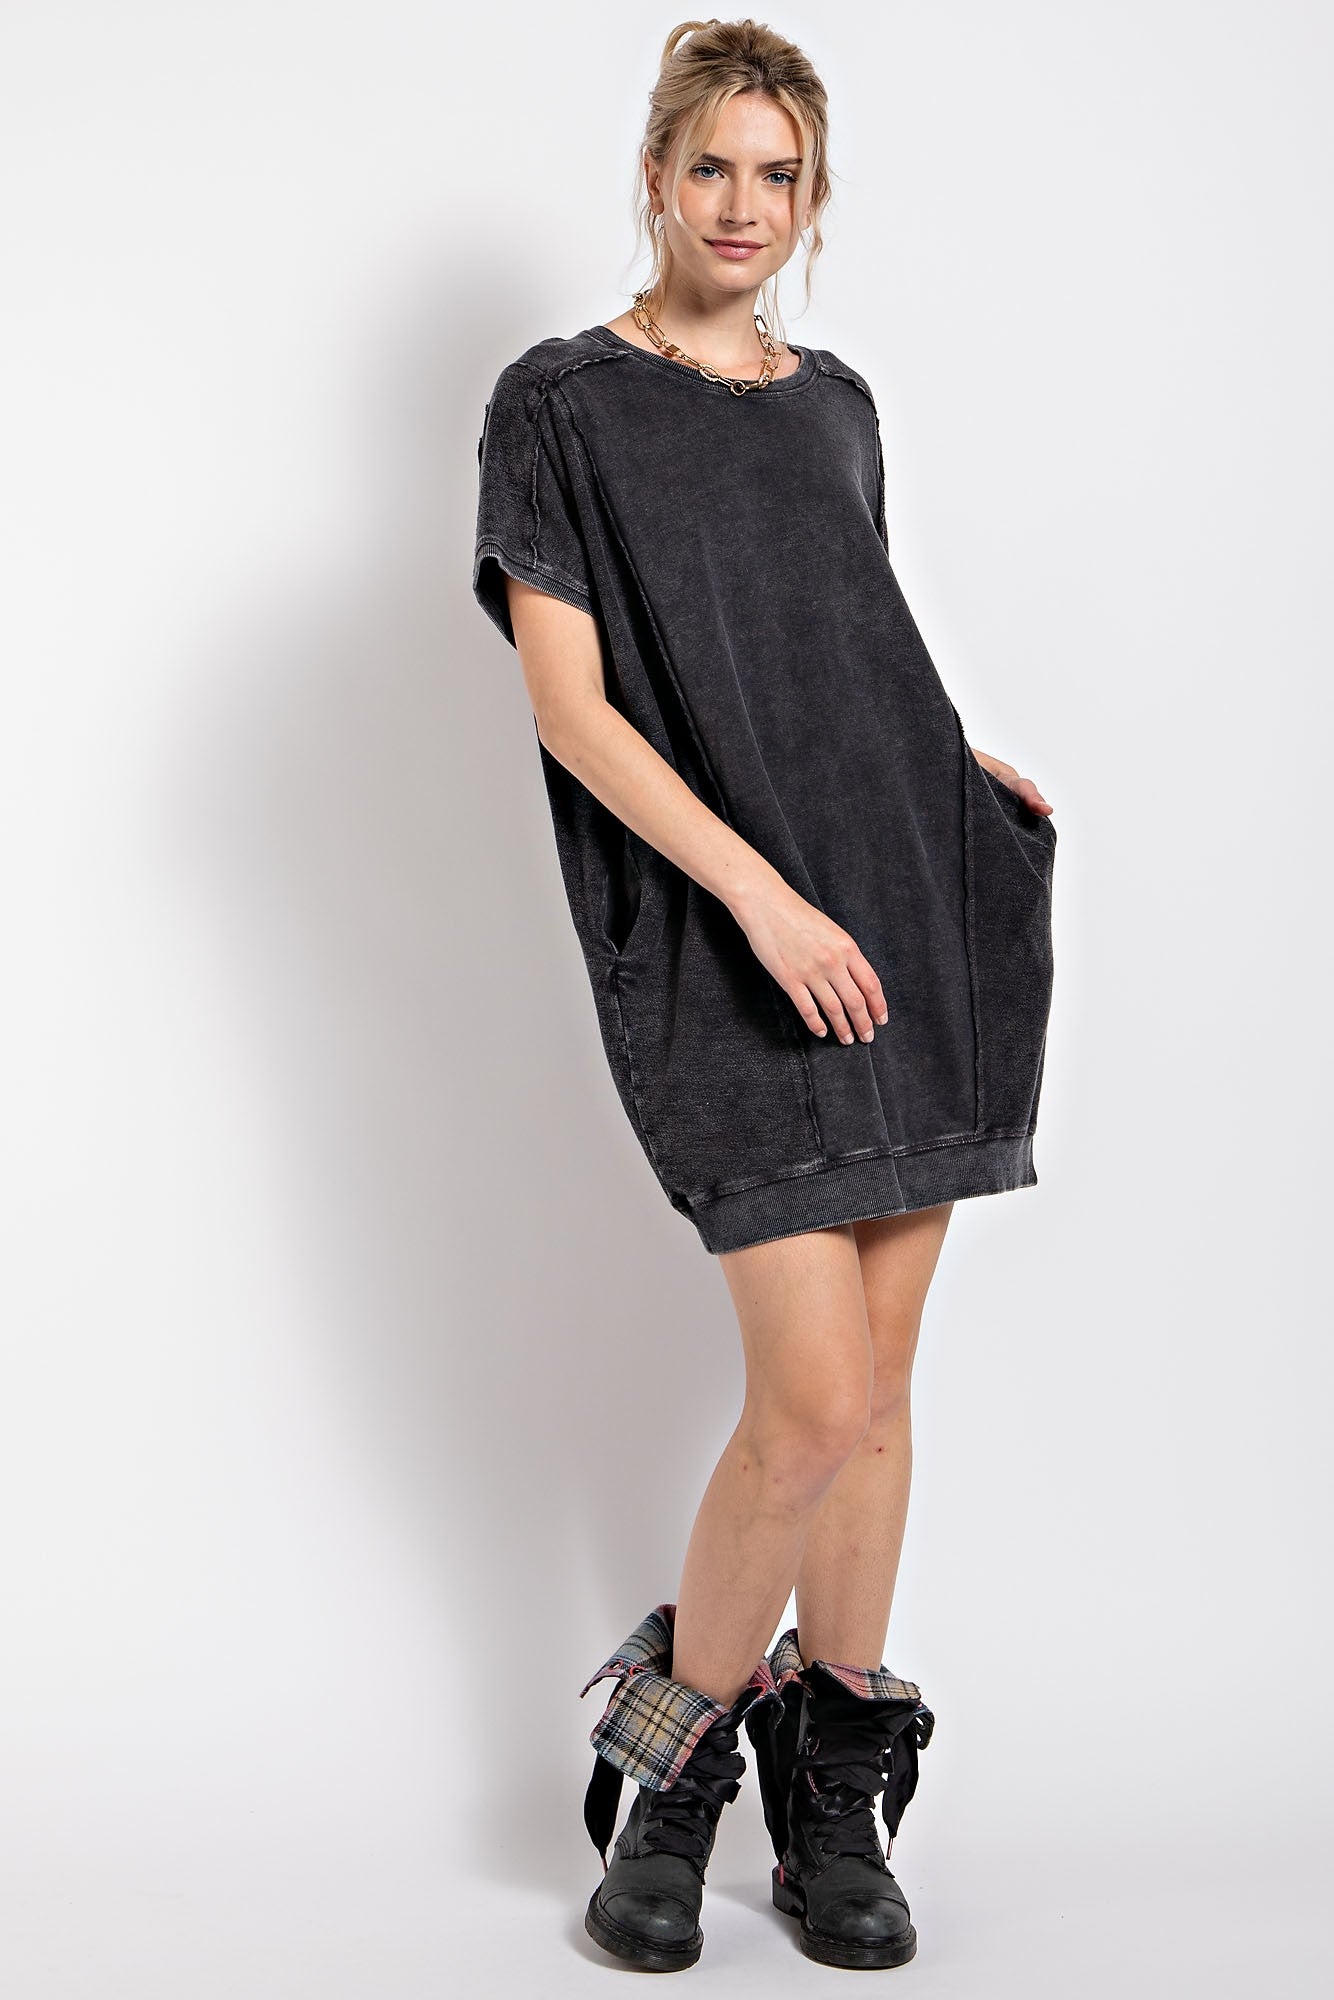 Andi Mineral Washed Dress